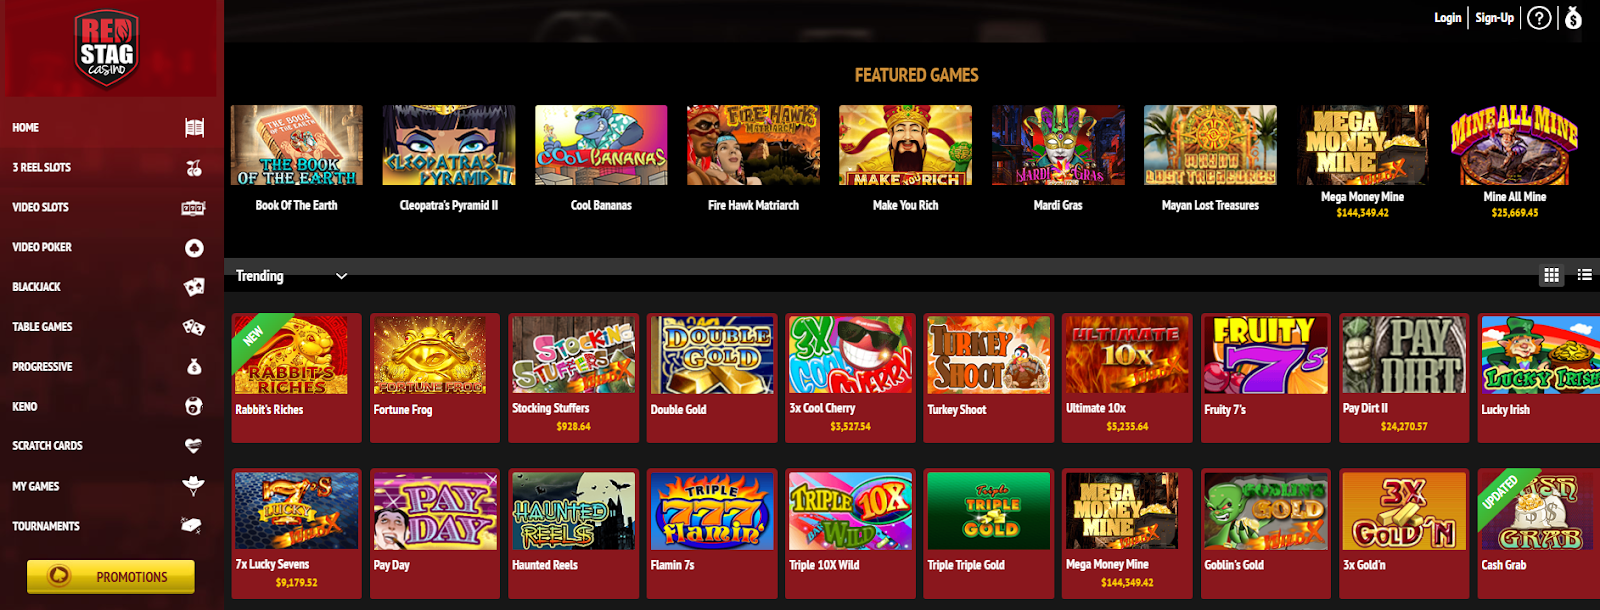 Casino Games Online: Top 12 Real Money Slots, Roulette, and Blackjack